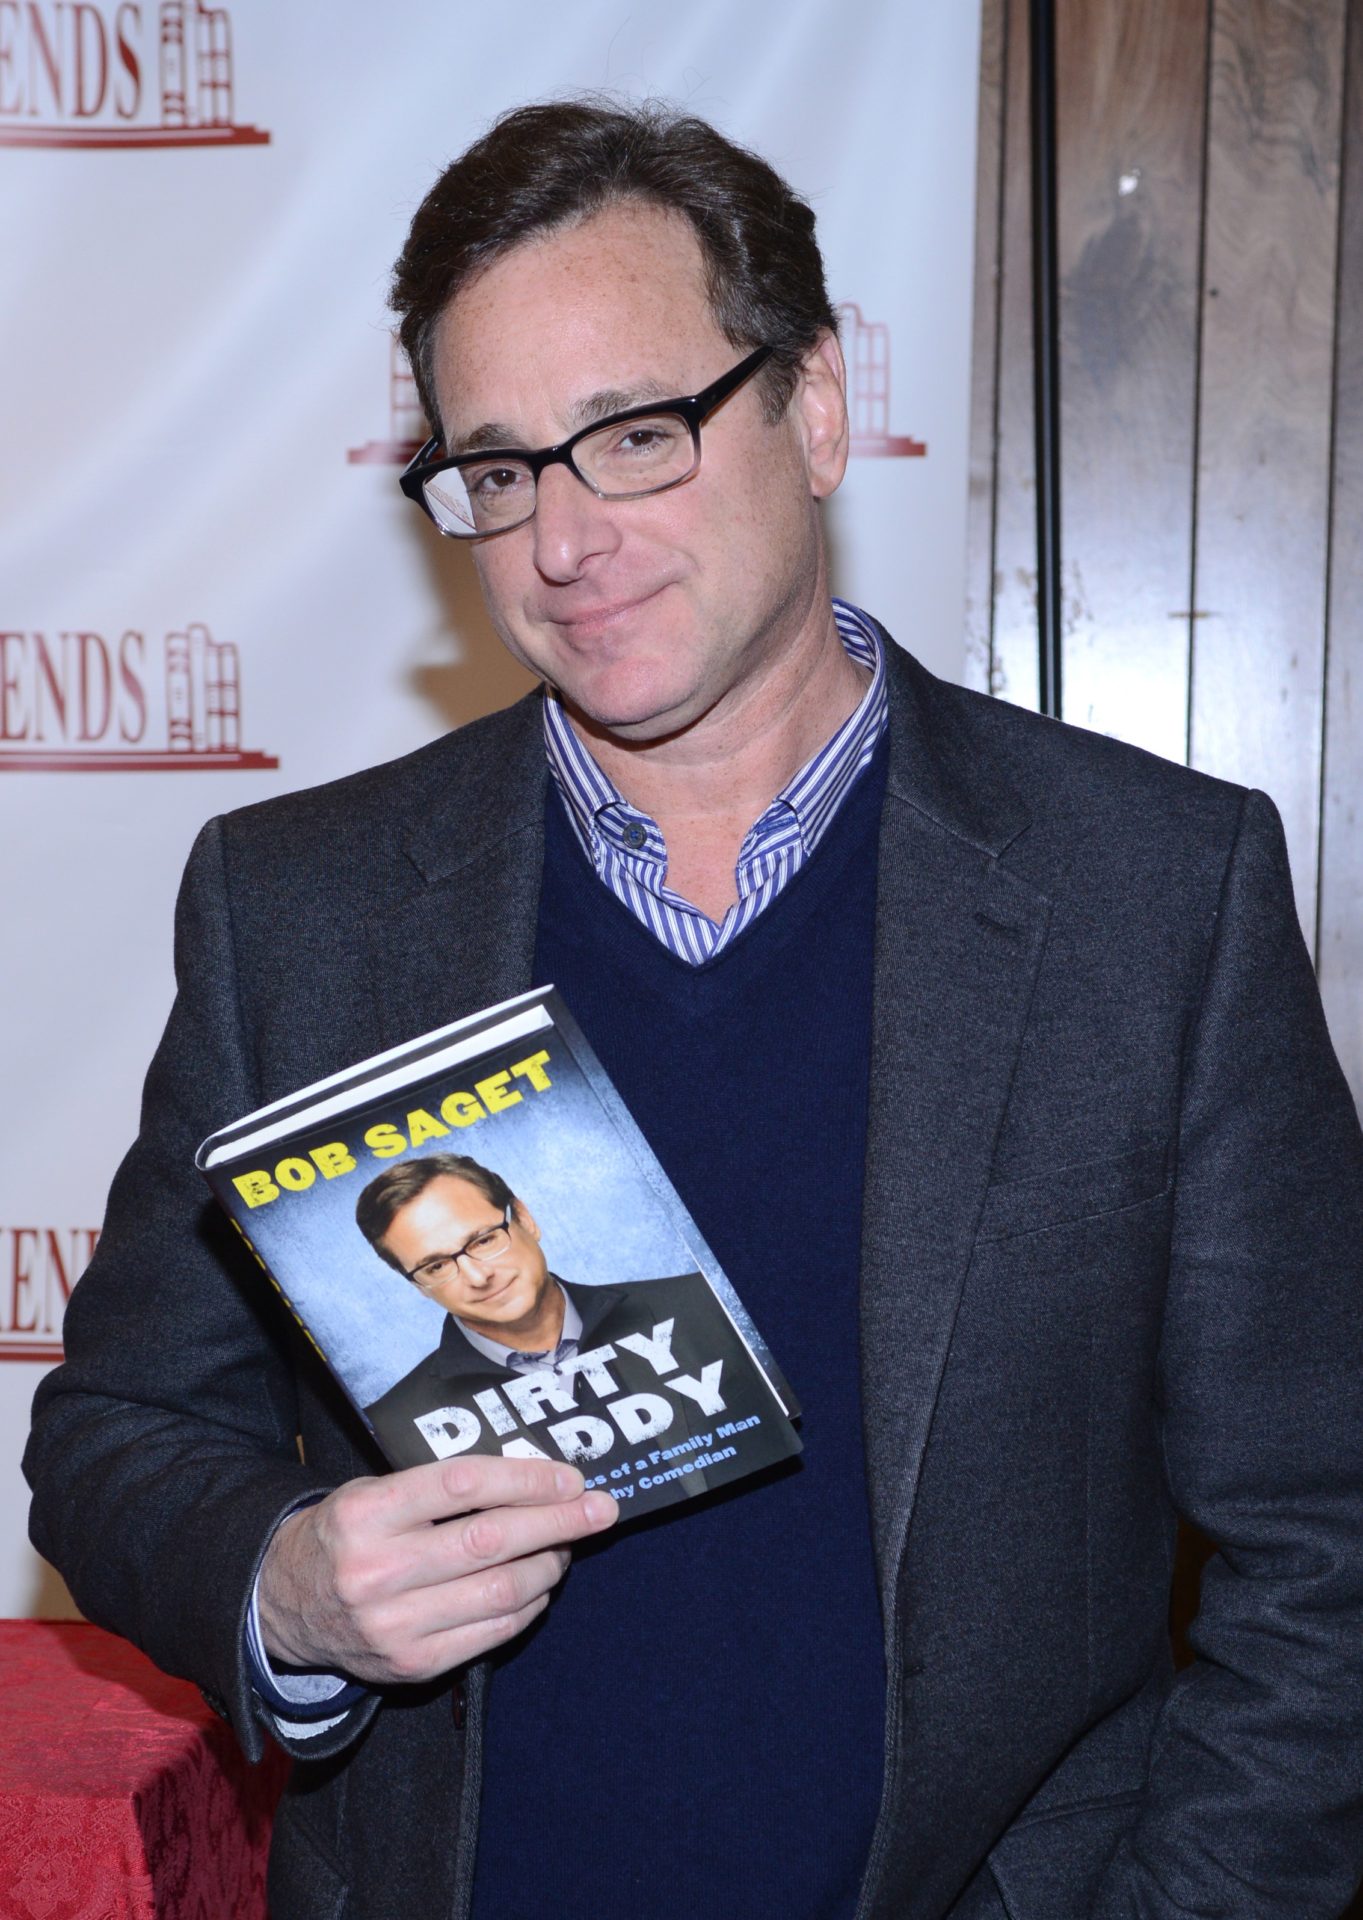 Bob Saget Signs Copies Of His New Book "Dirty Daddy The Chronicles Of A Family Man Turned Filthy Comedian"